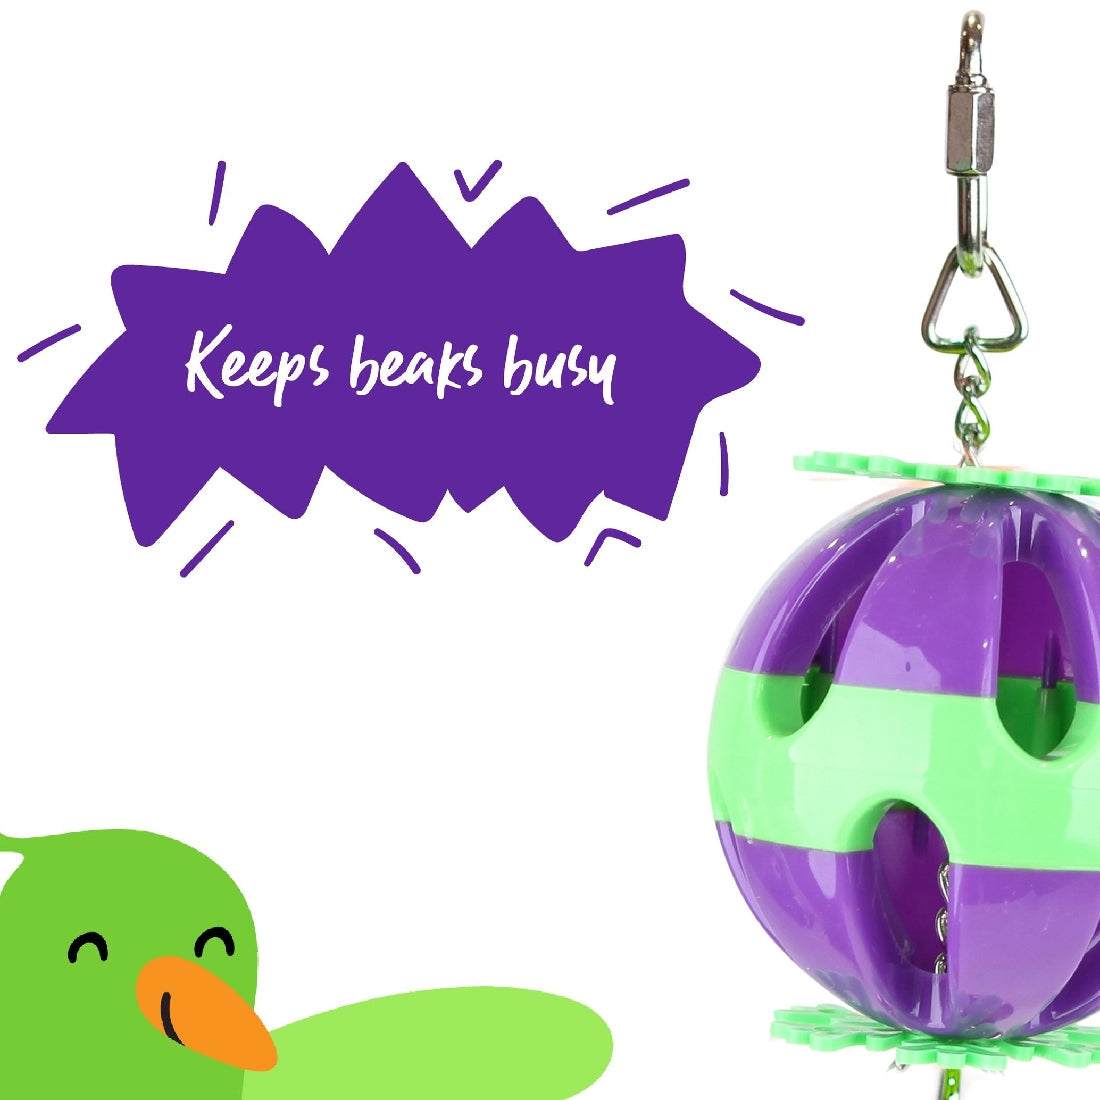 Purple and green spherical bird toy with metal clasp attachment.